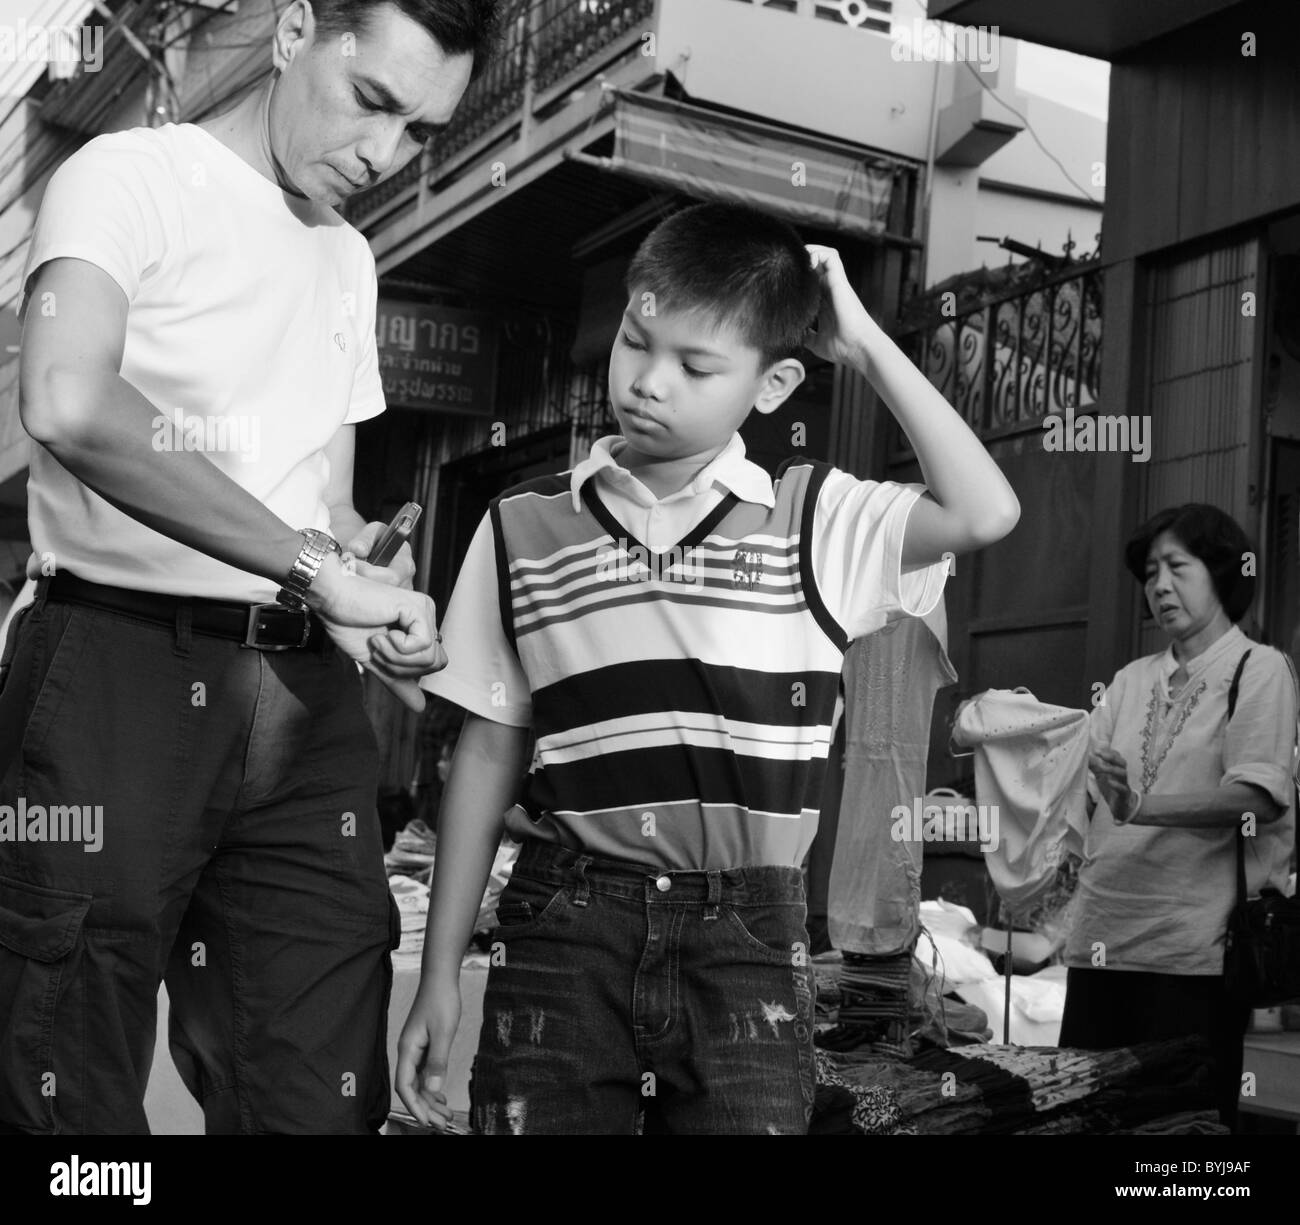 Black and white photograph of a Thai boy and man telling the time Stock Photo